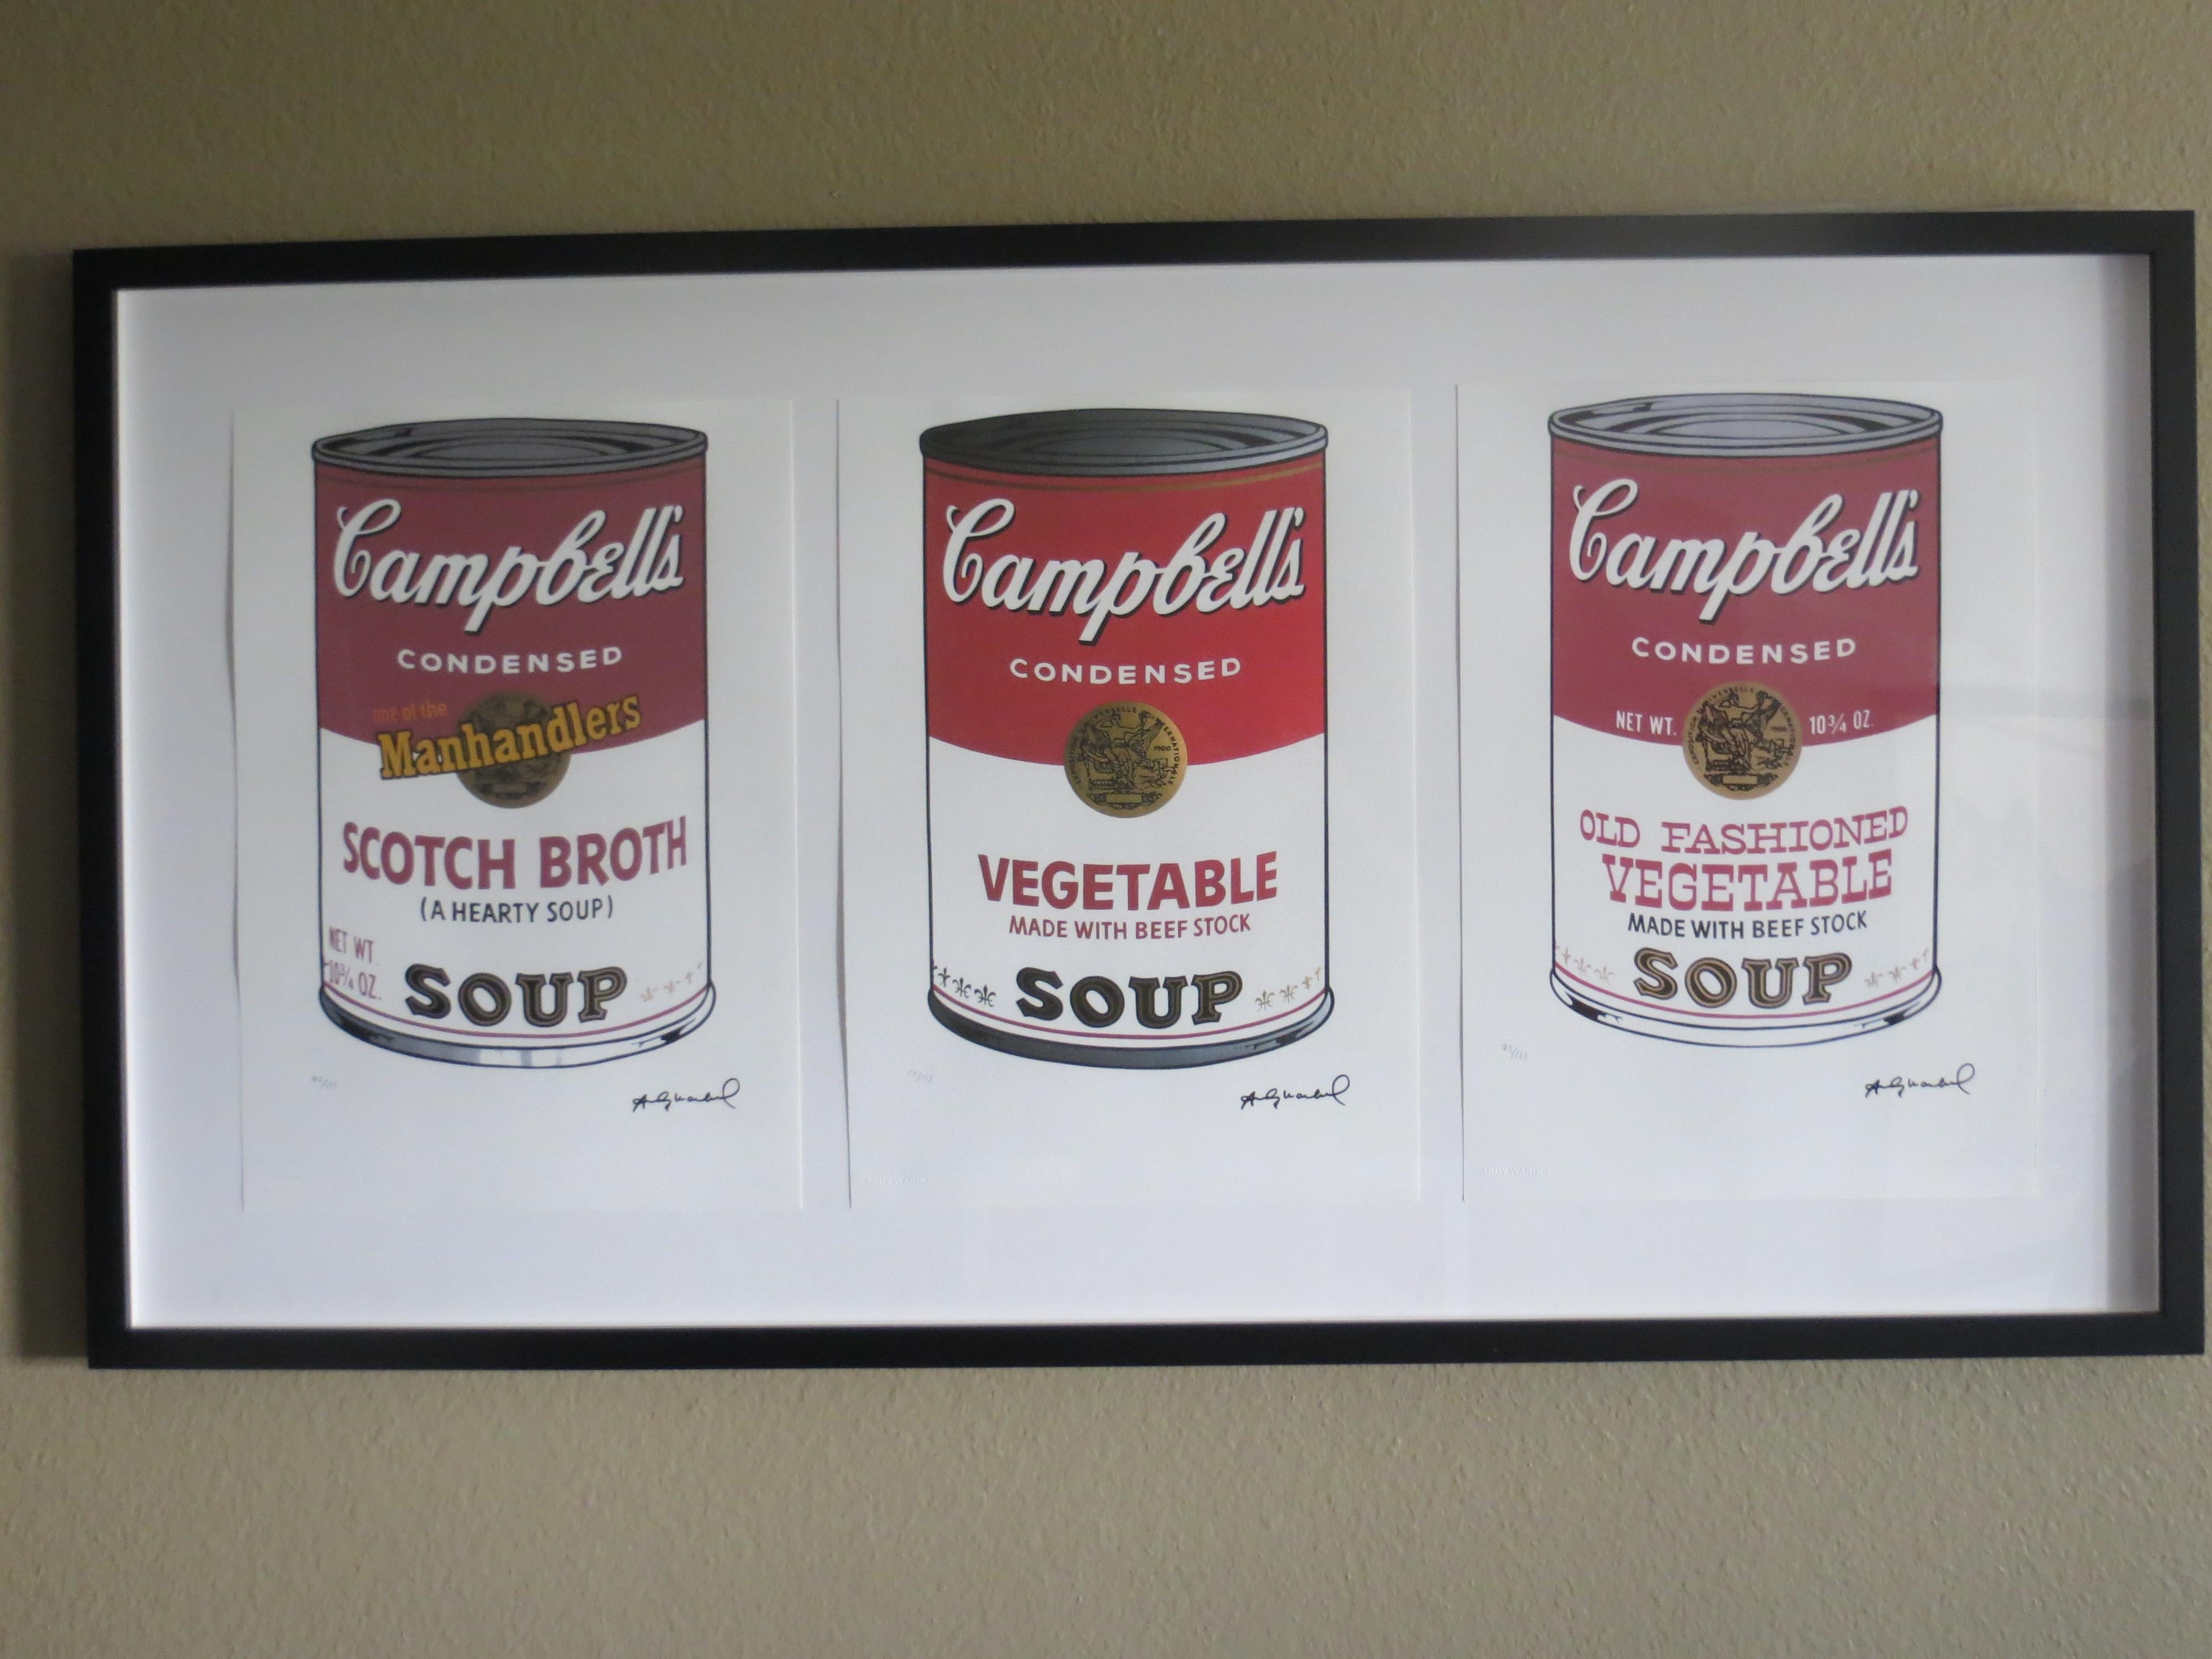 
Andy Warhol Andy Warhol Scotch Broth Soup, Campbell’s Soup II, 1969 is an incredible version of the Campbell’s soup can. Part of Campbell’s “Manhandler” series, which were created to cater to a male consumer that wanted a more substantial soups,